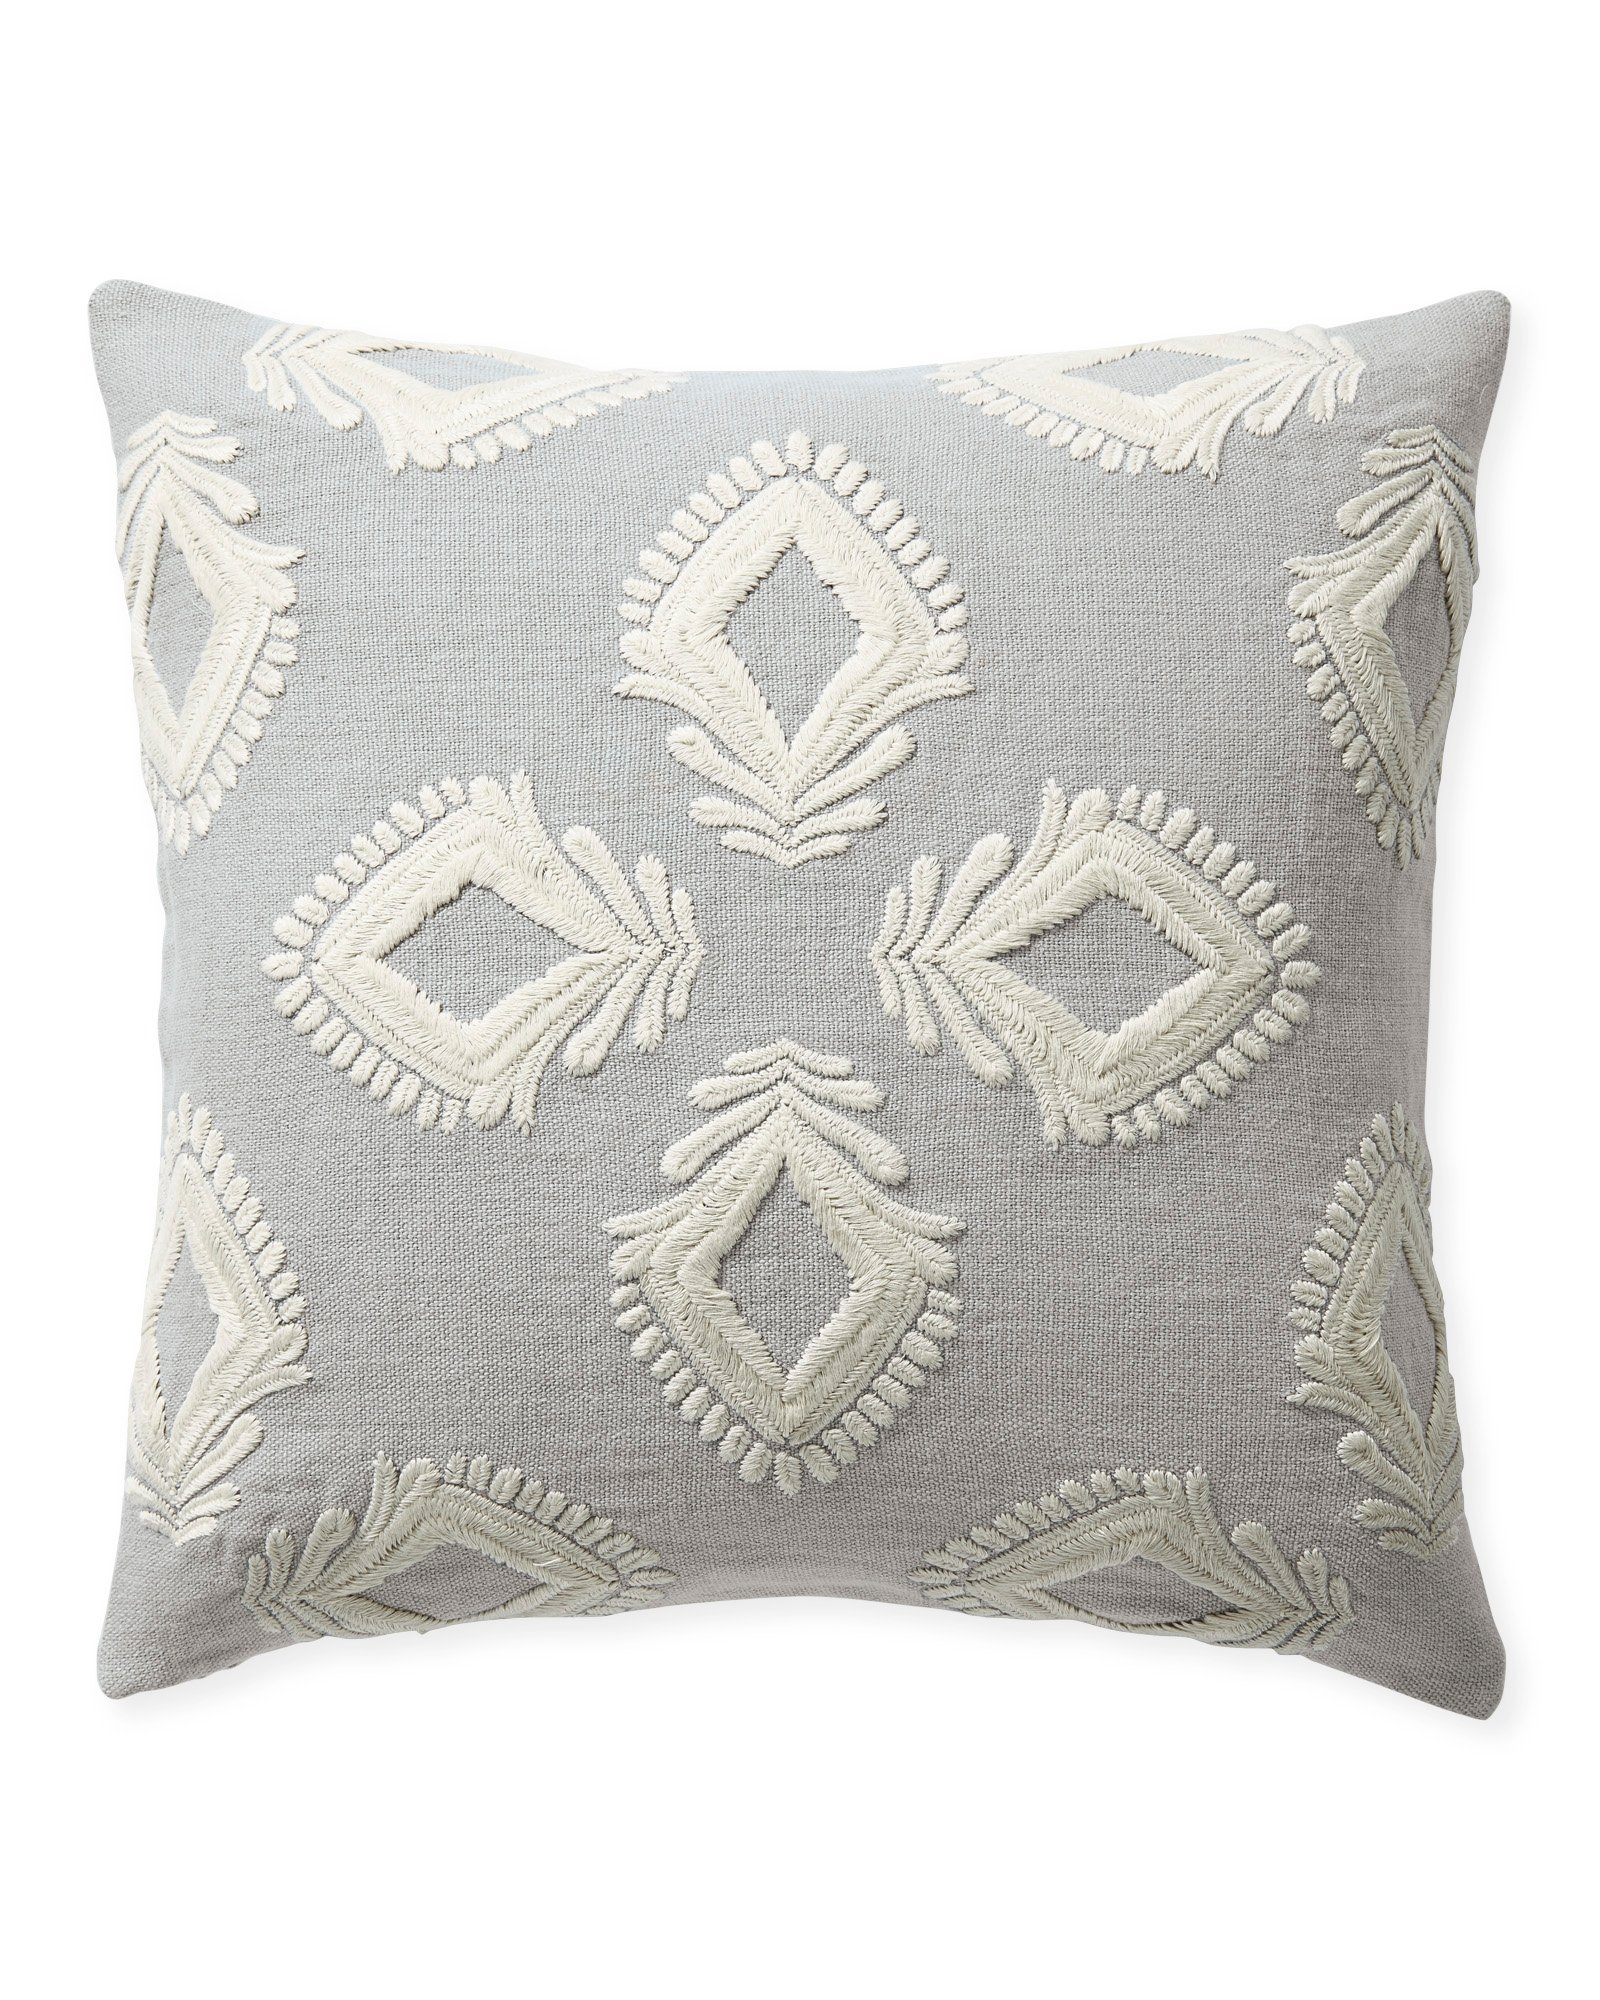 Leighton 24" SQ Pillow Cover - Smoke - Insert sold separately - Image 0